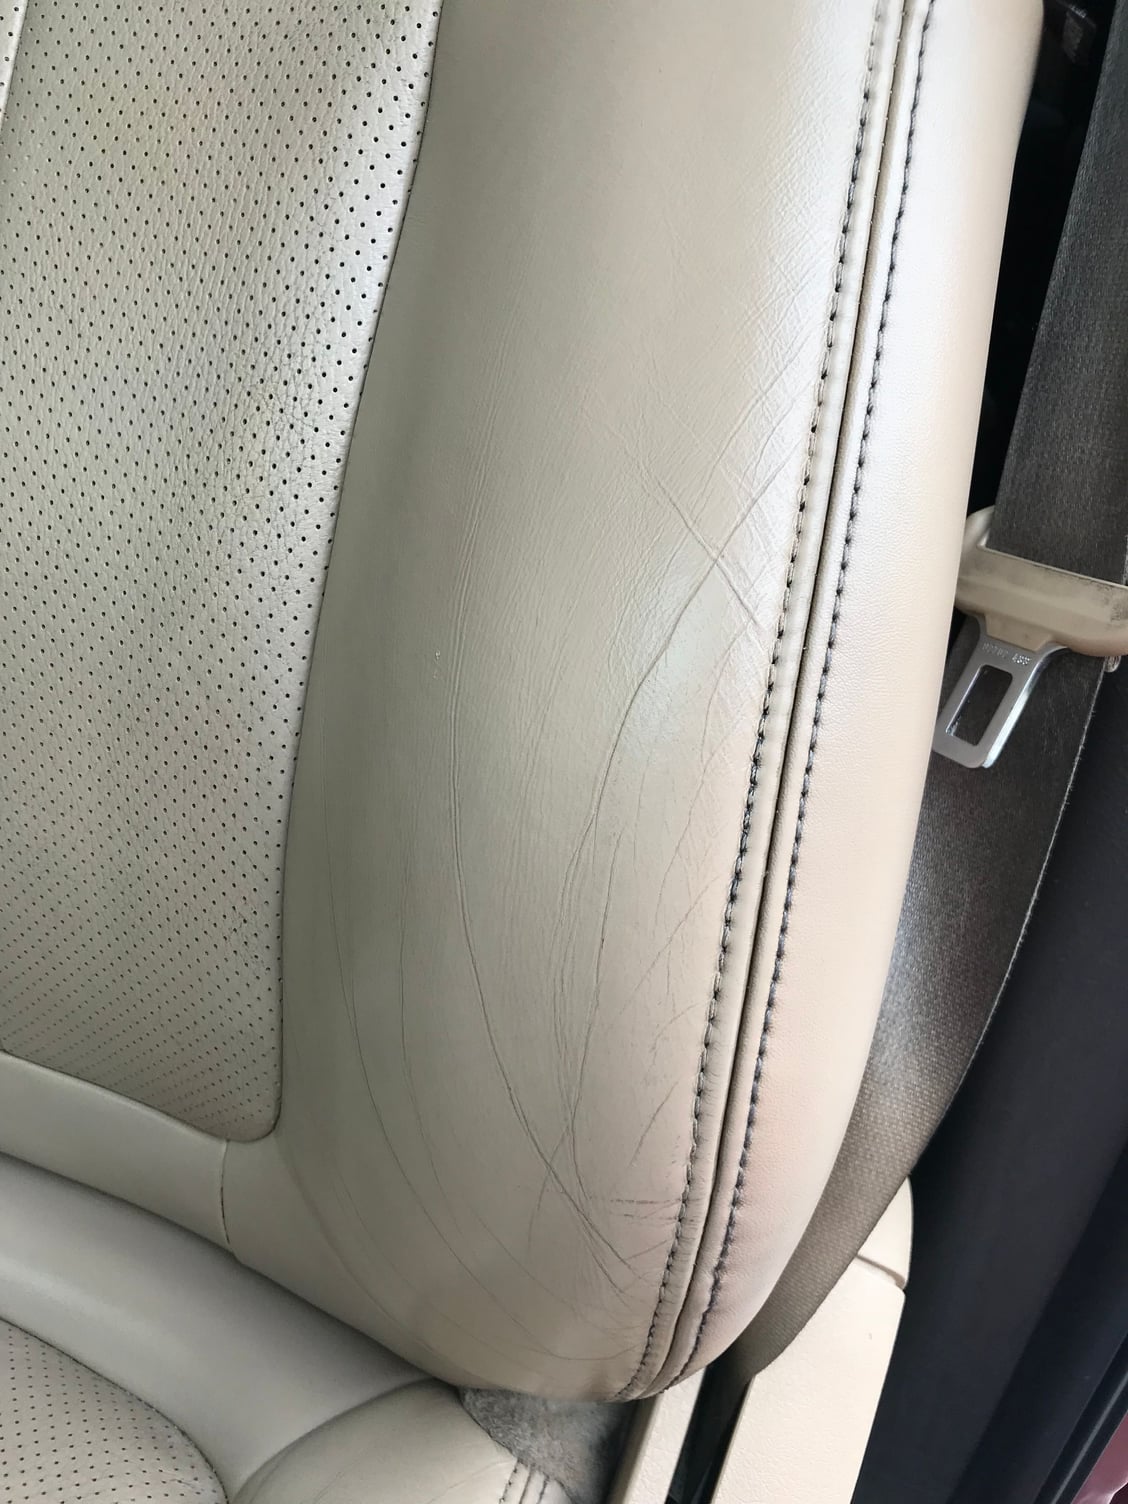 Leather seats cleaning, conditioning, repairing - Ford F150 Forum ...